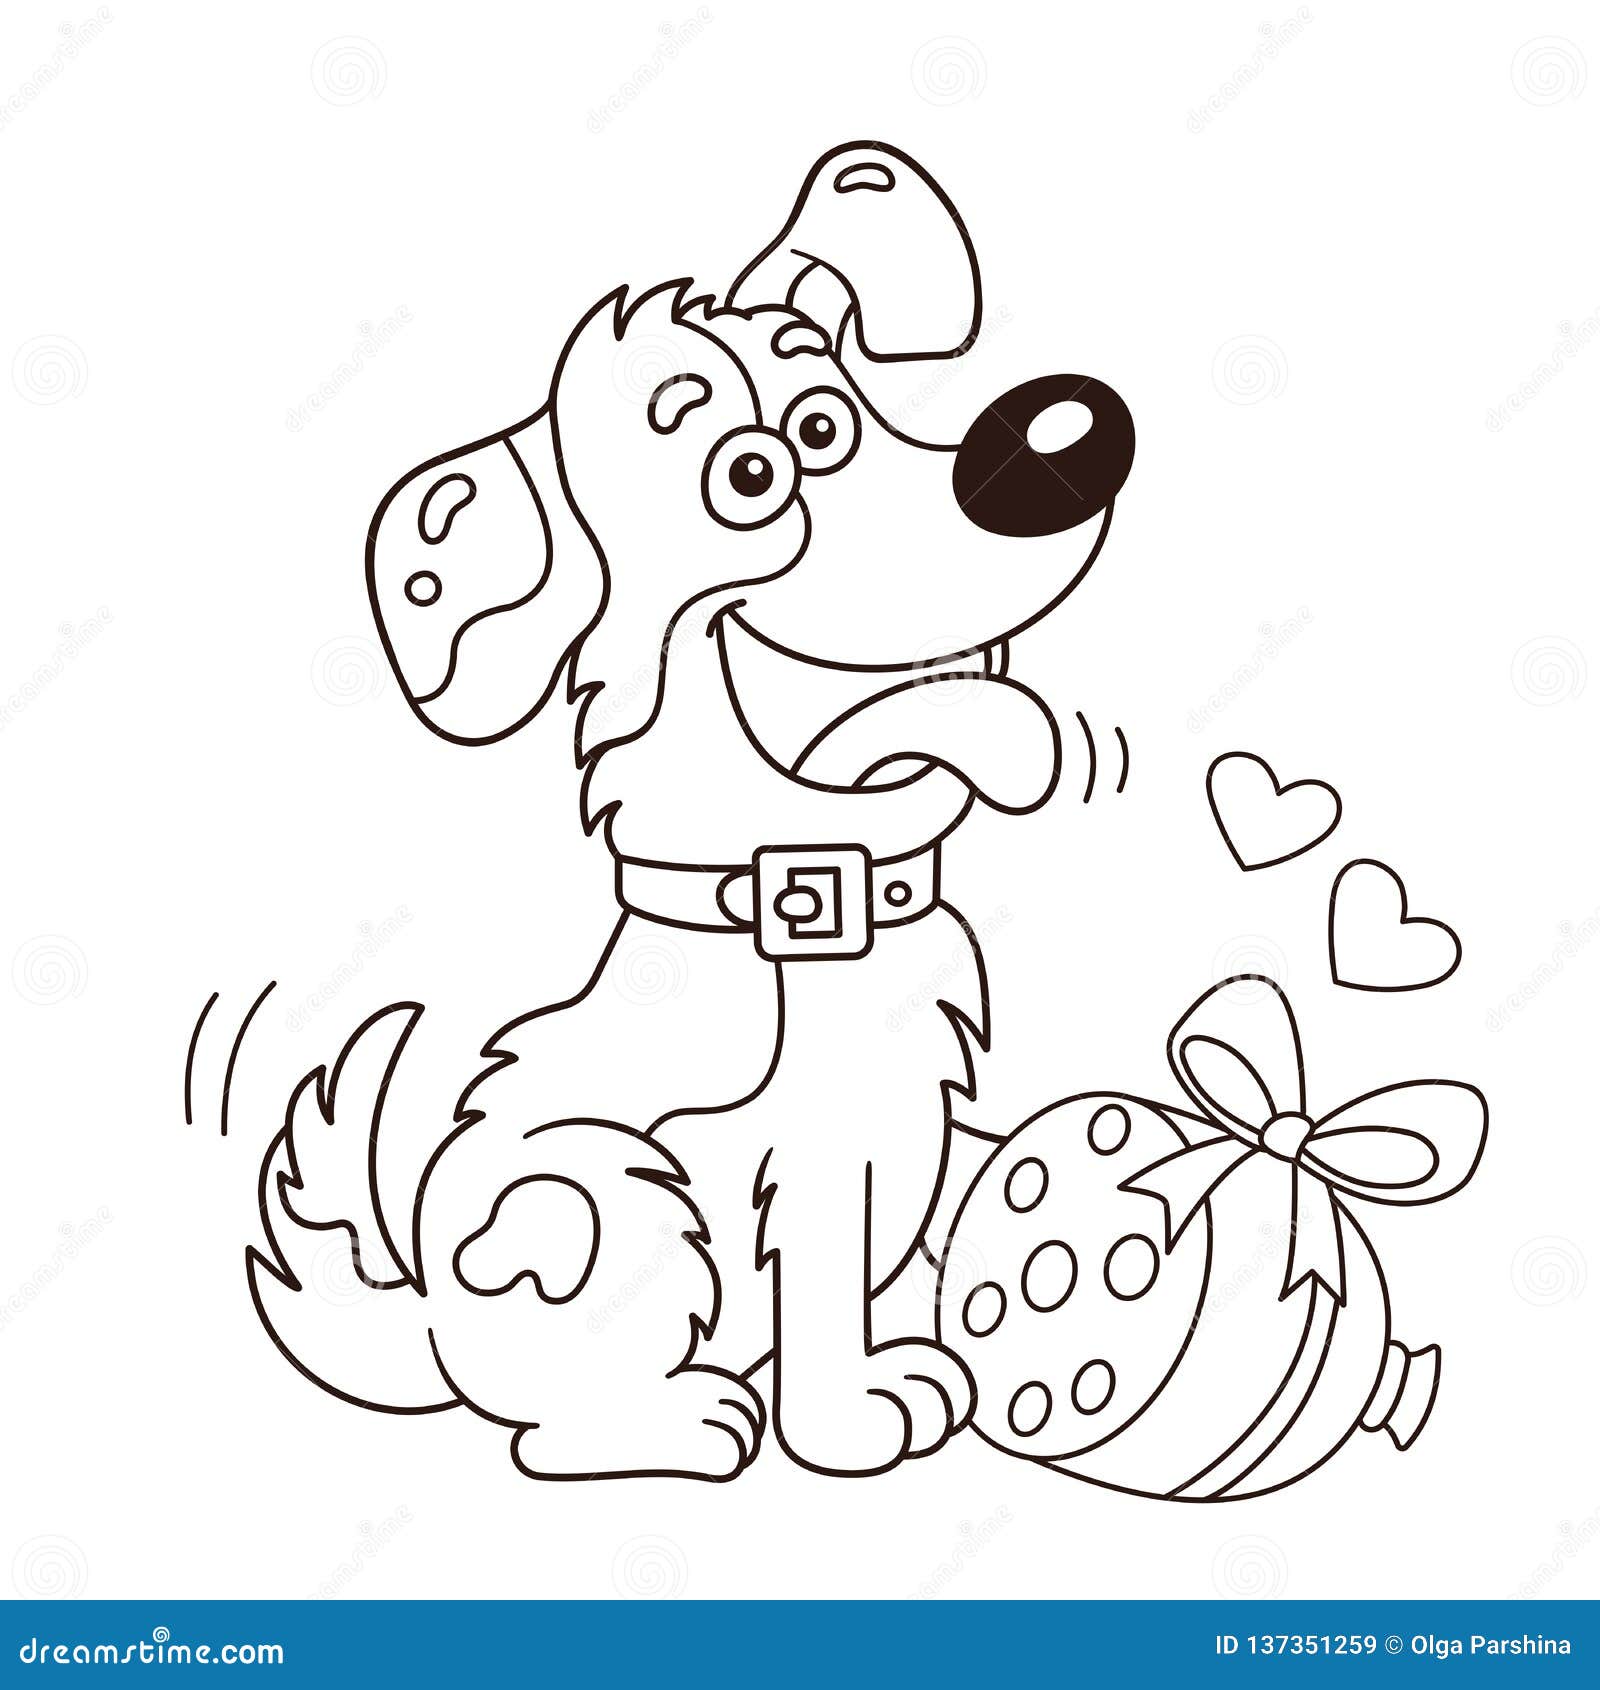 Coloring page outline of cartoon dog with sausage greeting card birthday valentines day stock vector